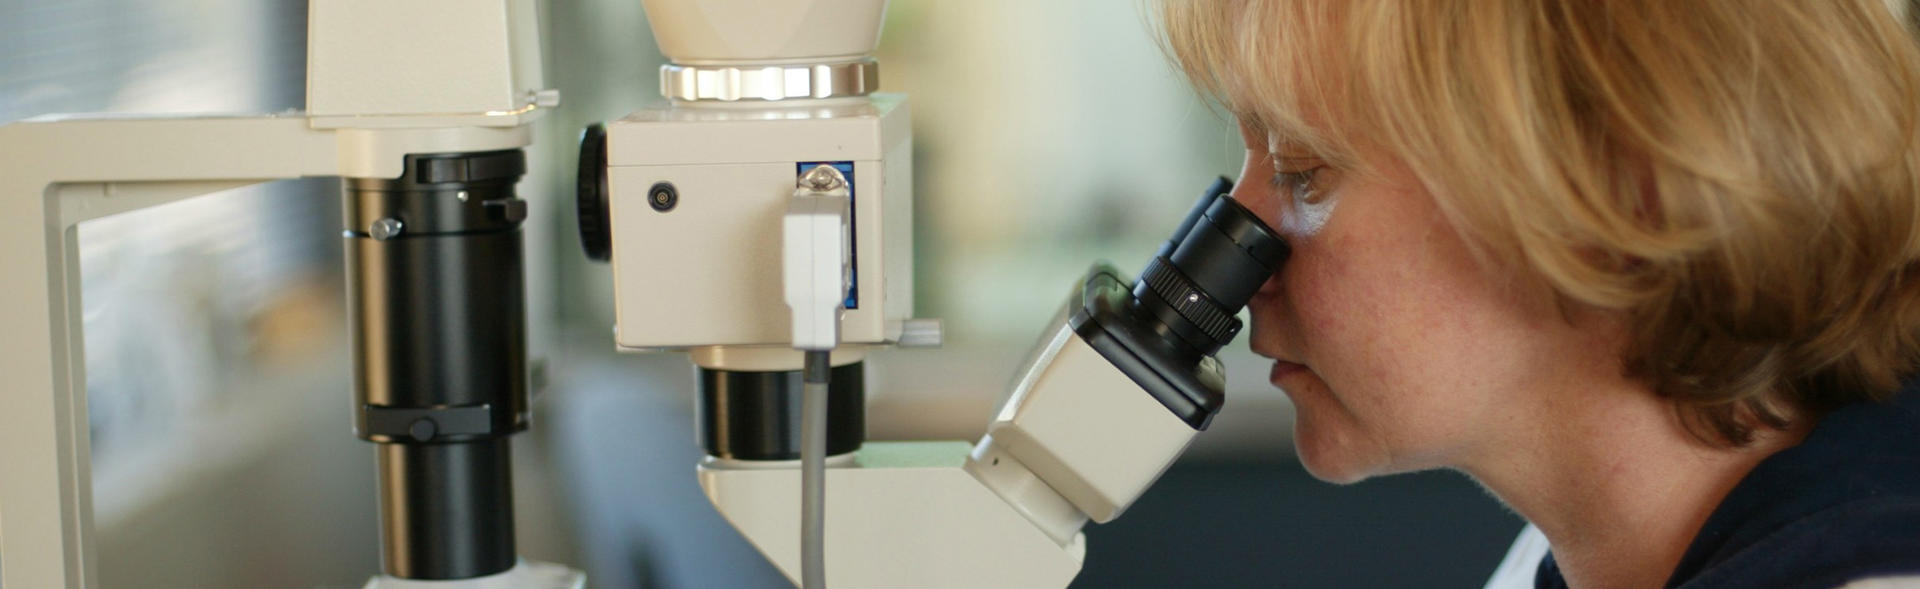 Female researcher looking through a microscope in the lab.